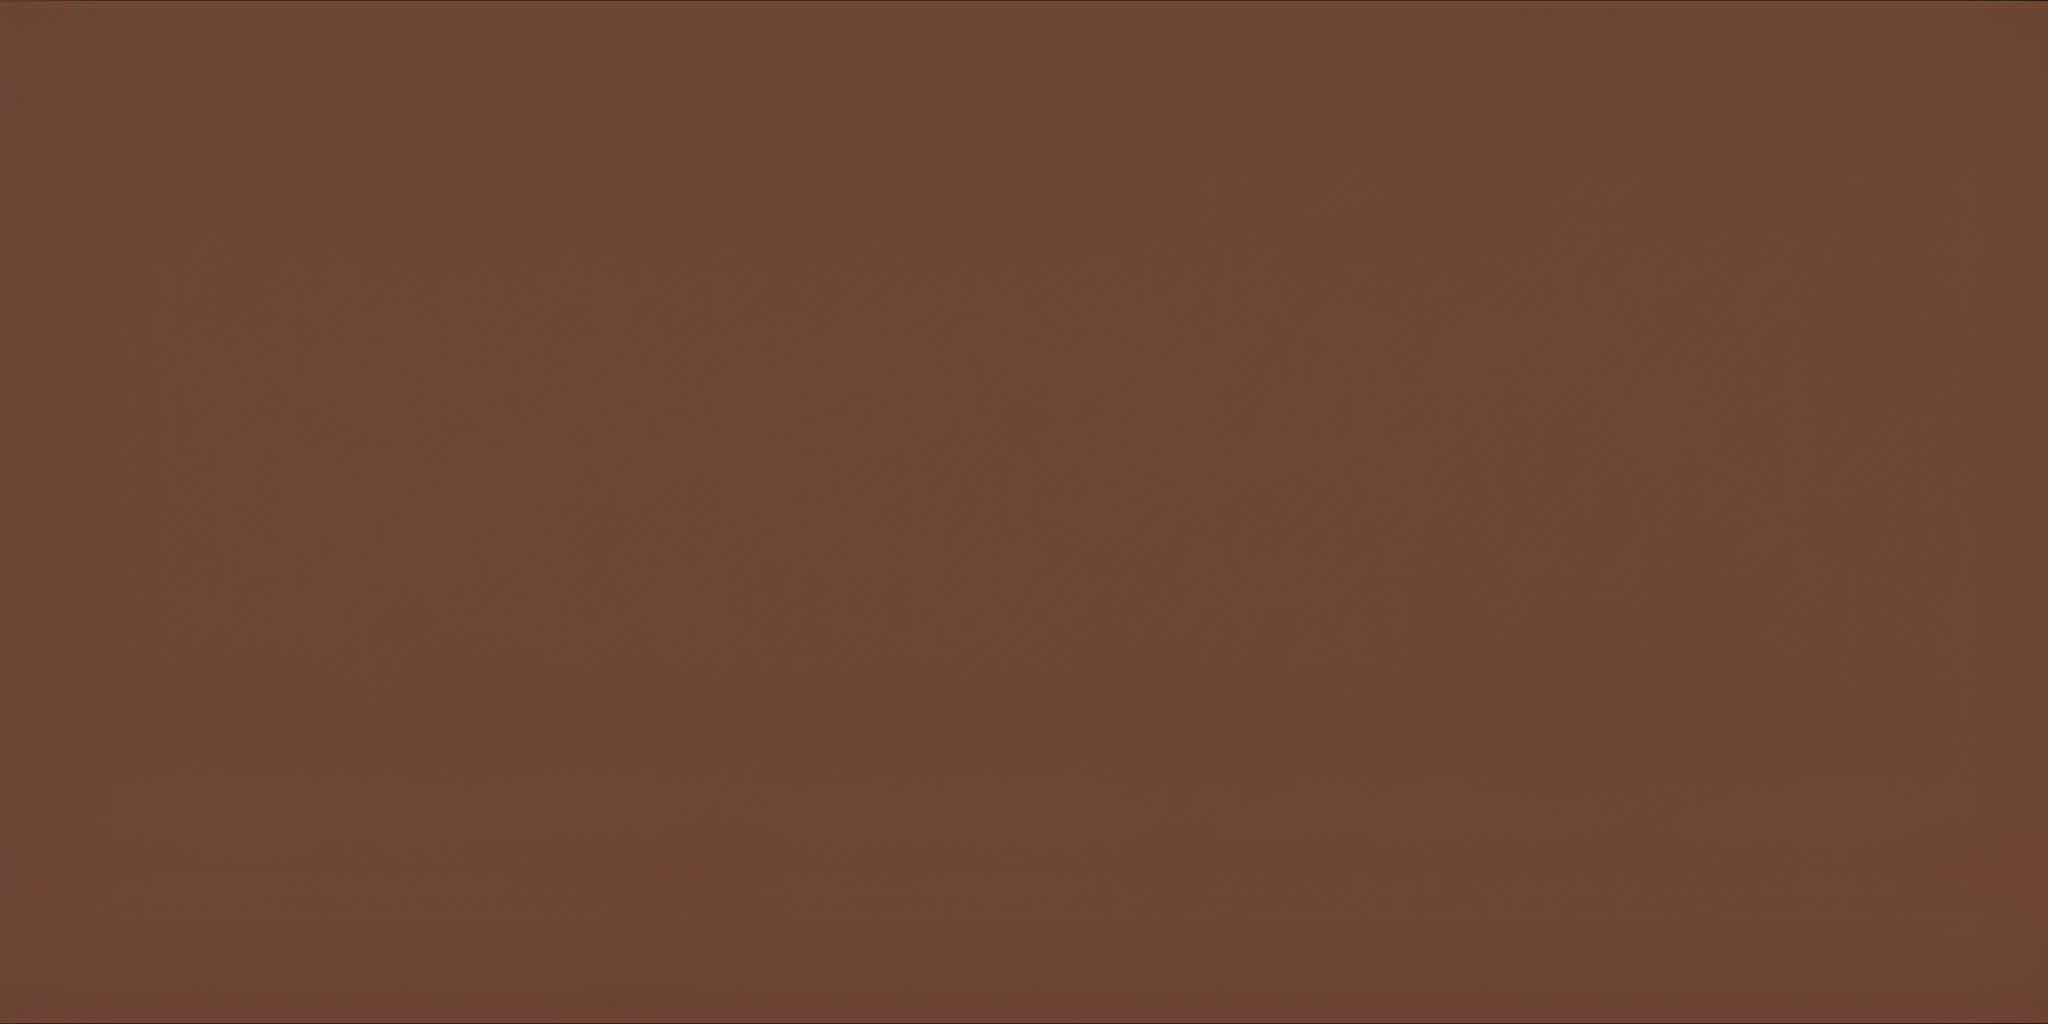 SAICOS Bel Air opaque Special Wood Colour solvent free 7281 Earth Brown, 0.125 L